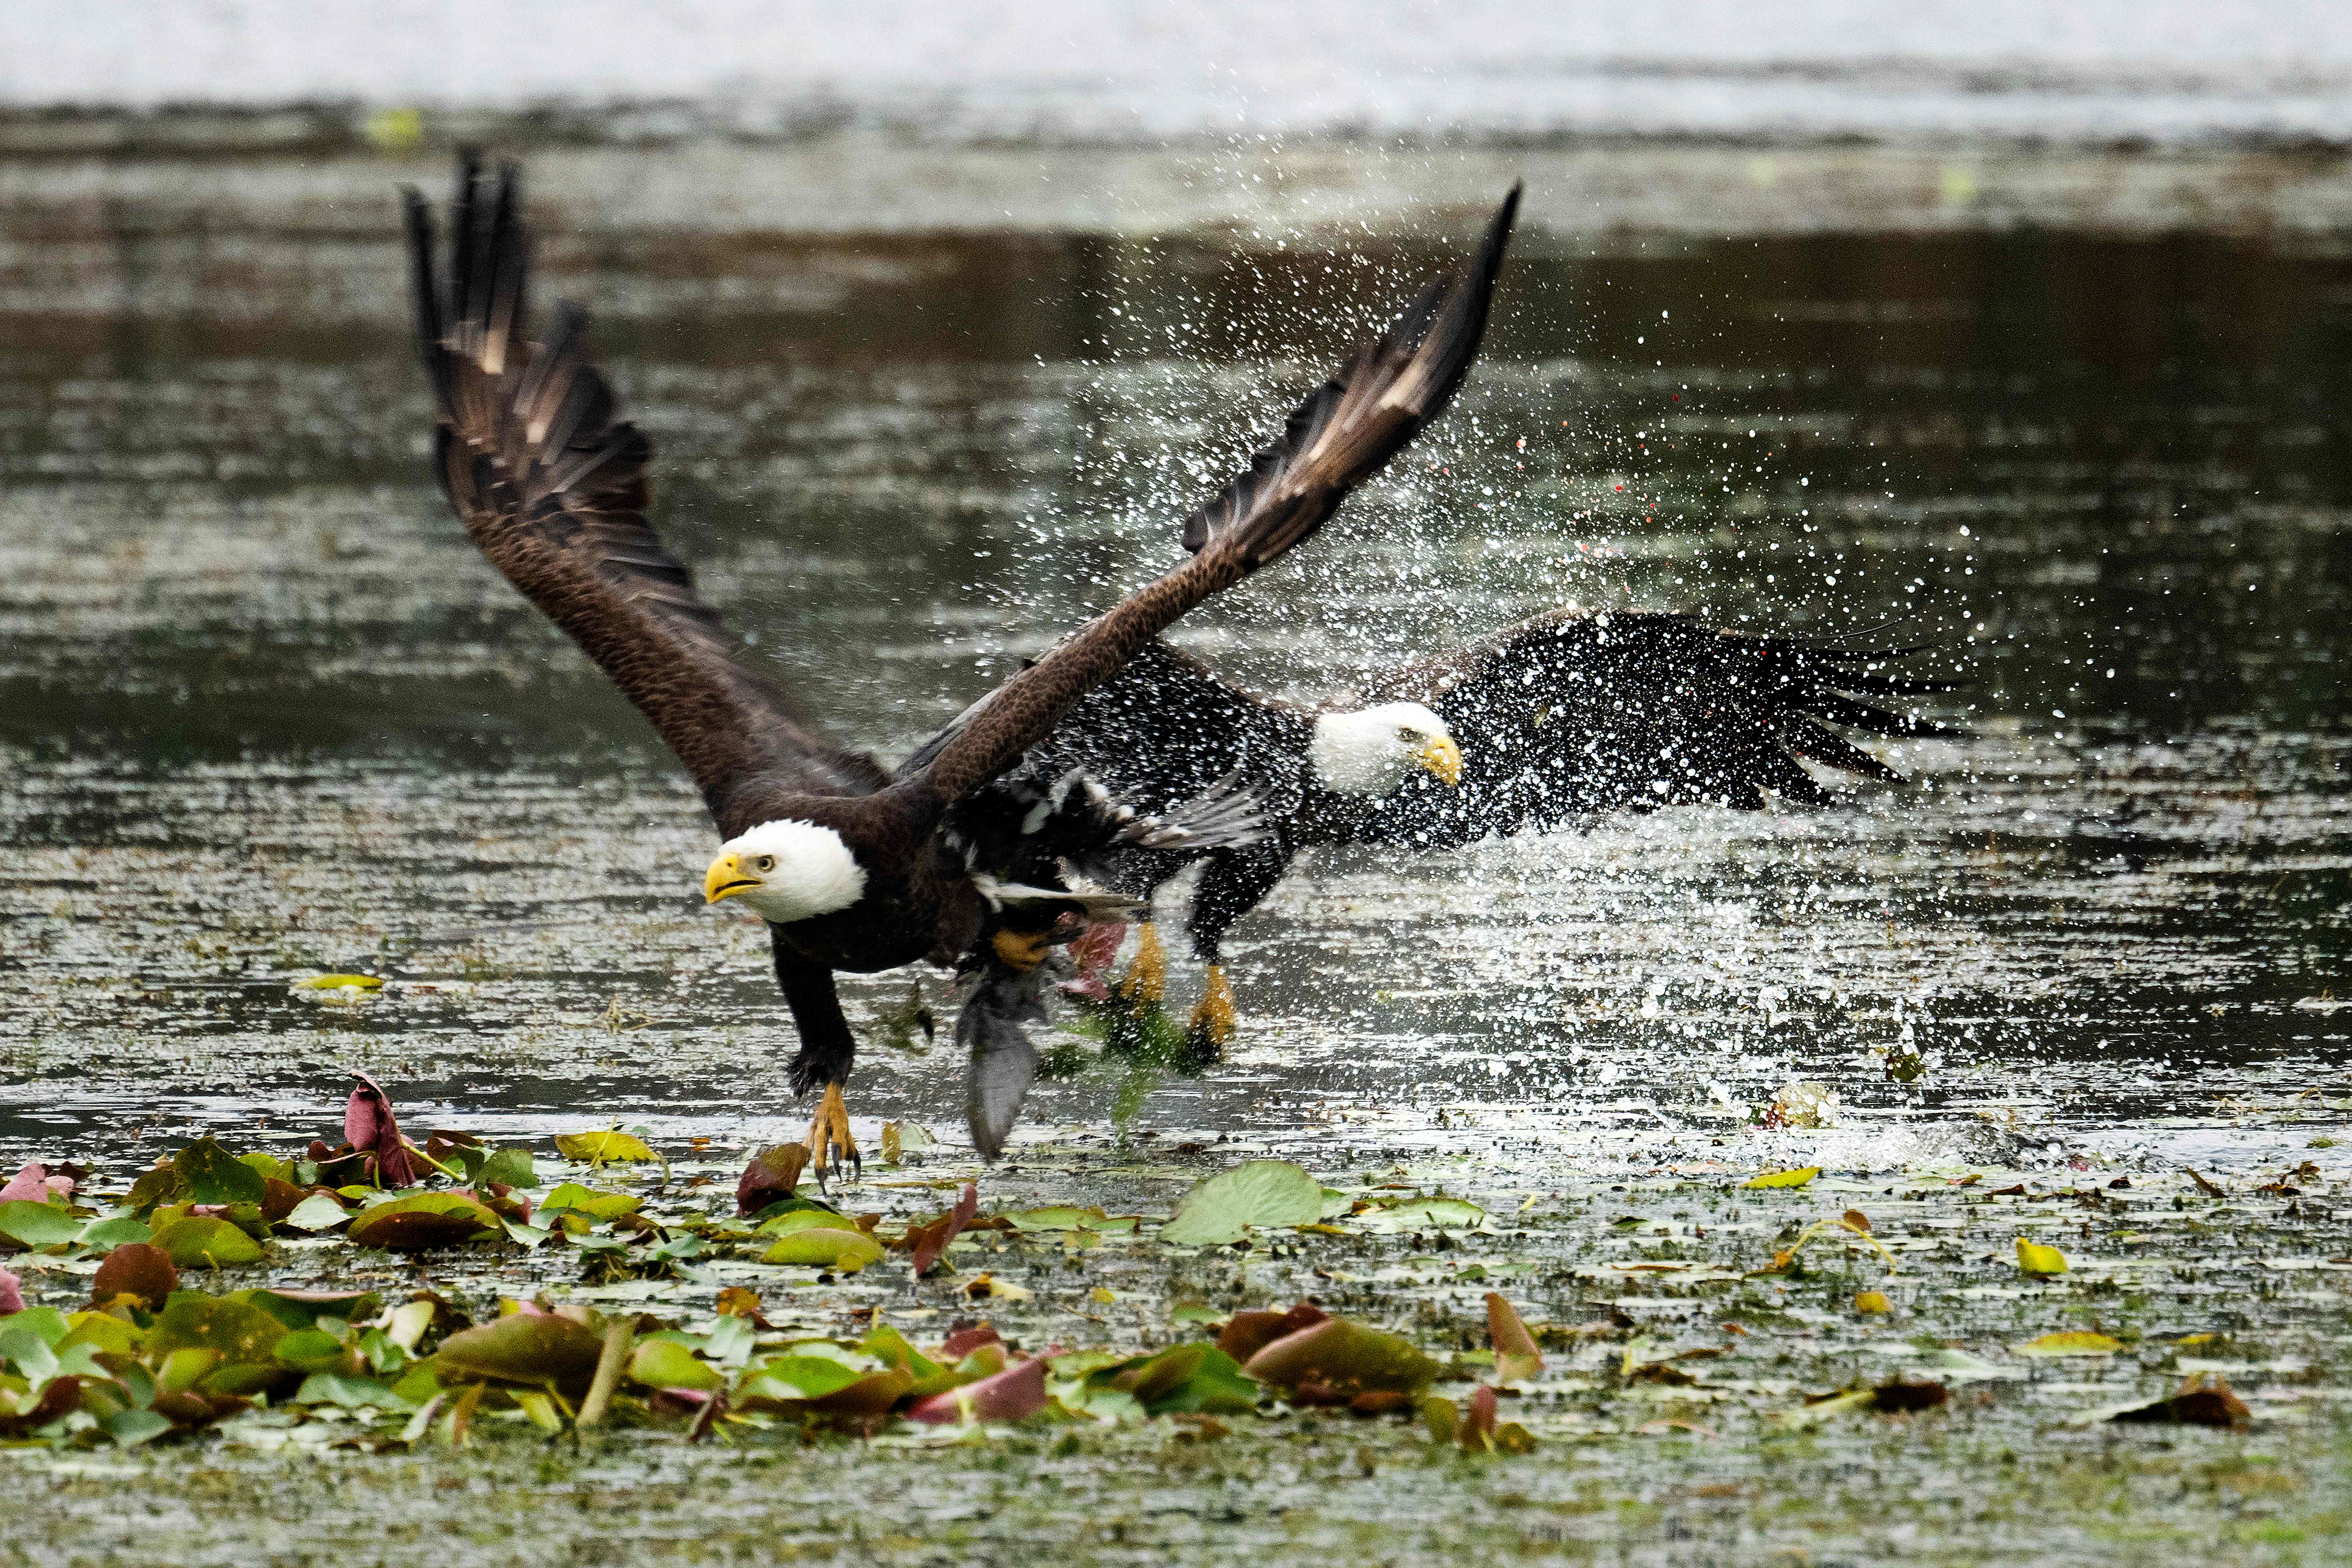 Two bald eagles swoop in to catch a coot in its talons at Orlando Wetlands Park in Christmas, Florida